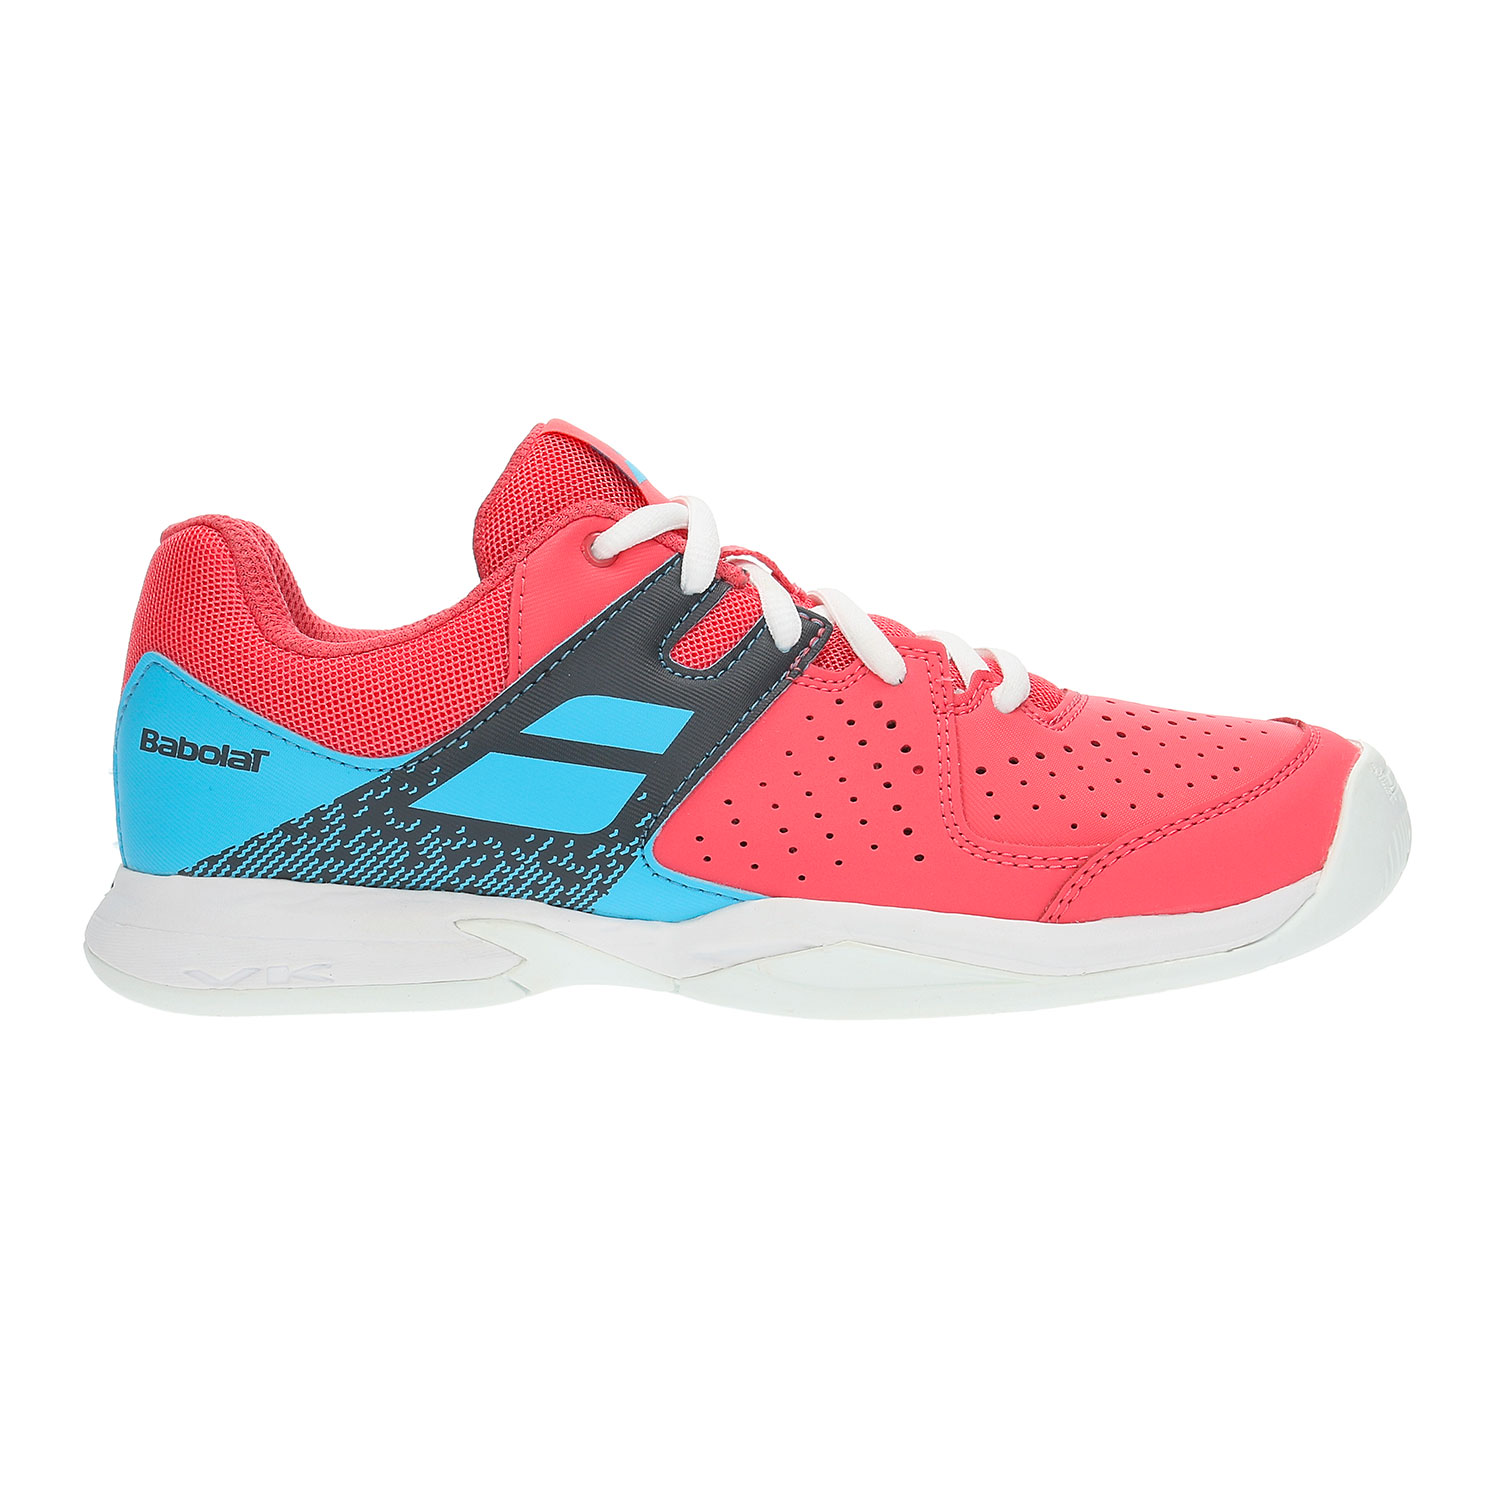 Babolat Pulsion All Court Junior Tennis Shoes - Pink/Blue